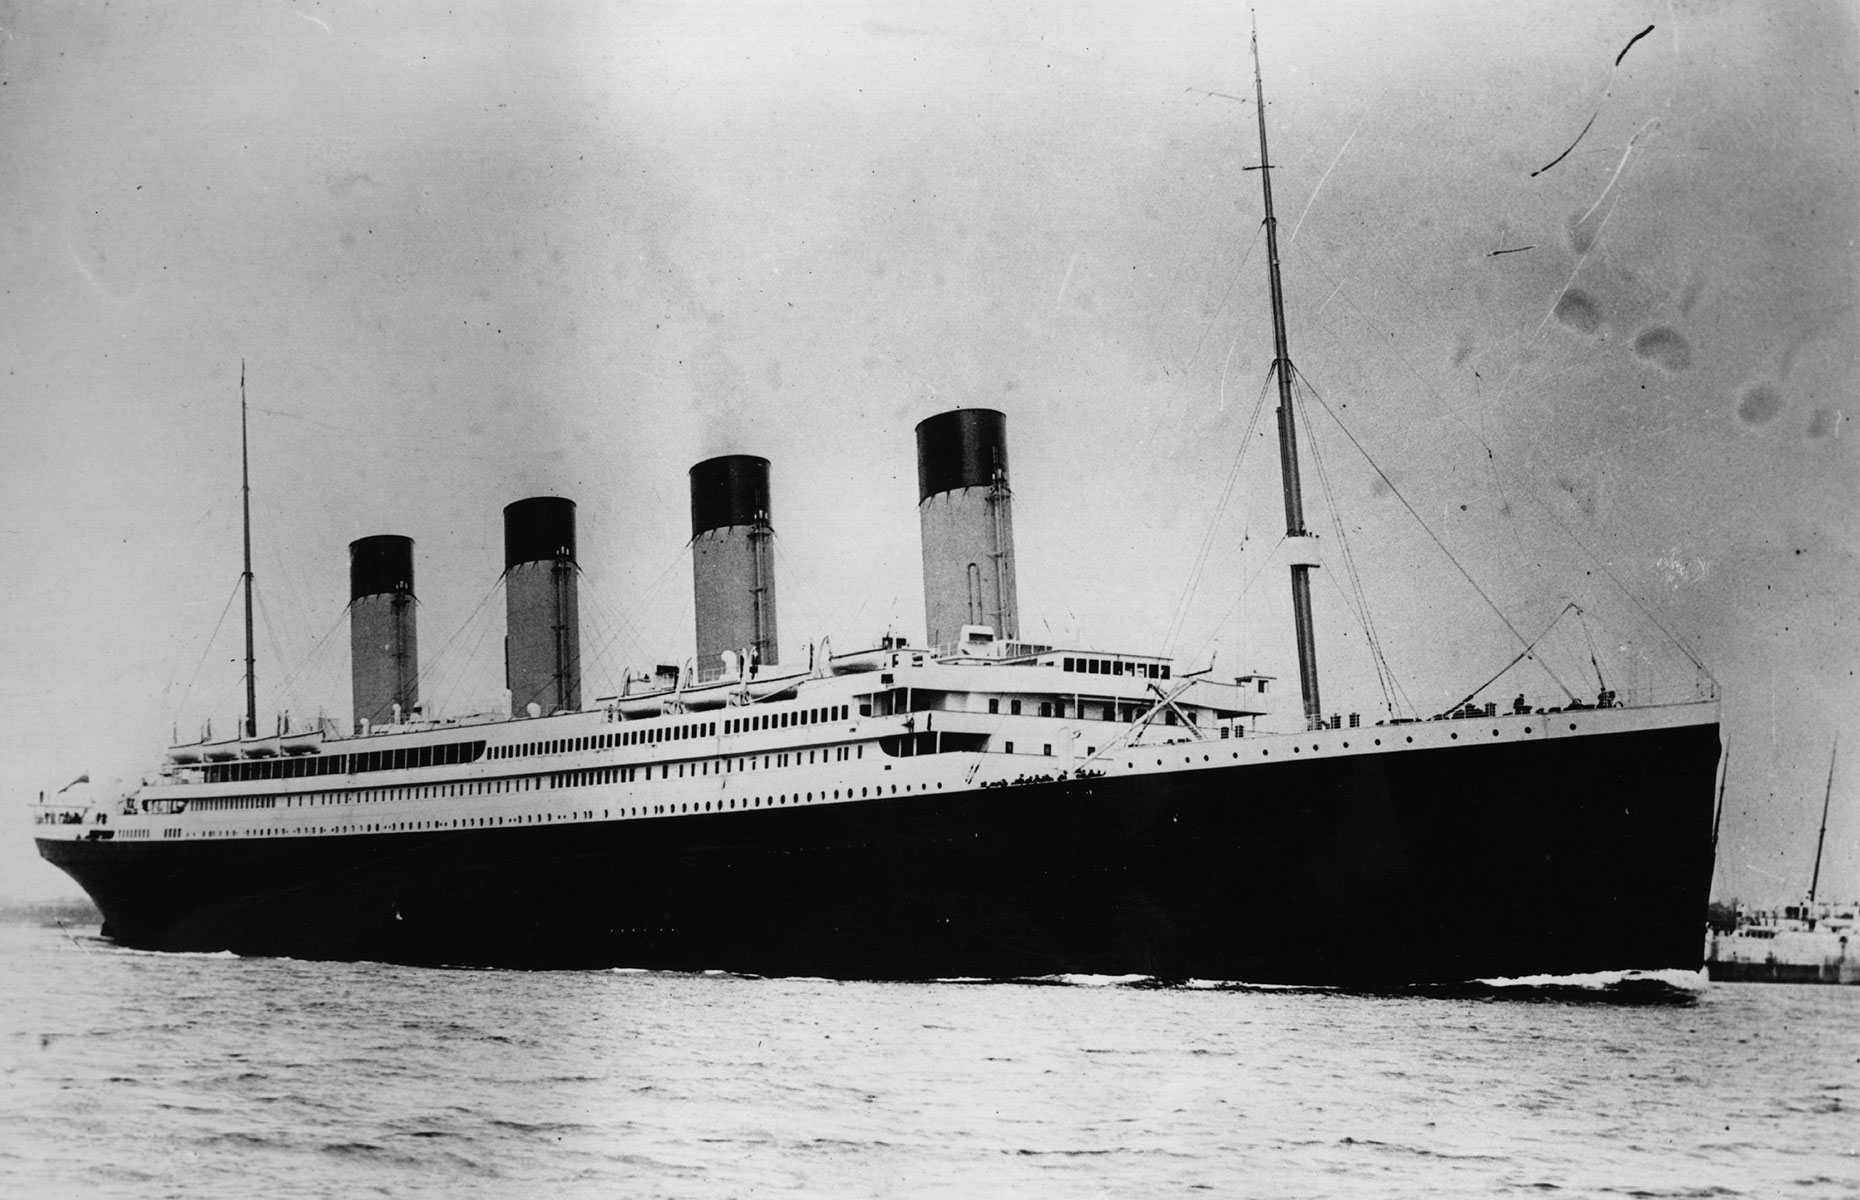 RMS Titanic (Central Press/Stringer/Getty Images)